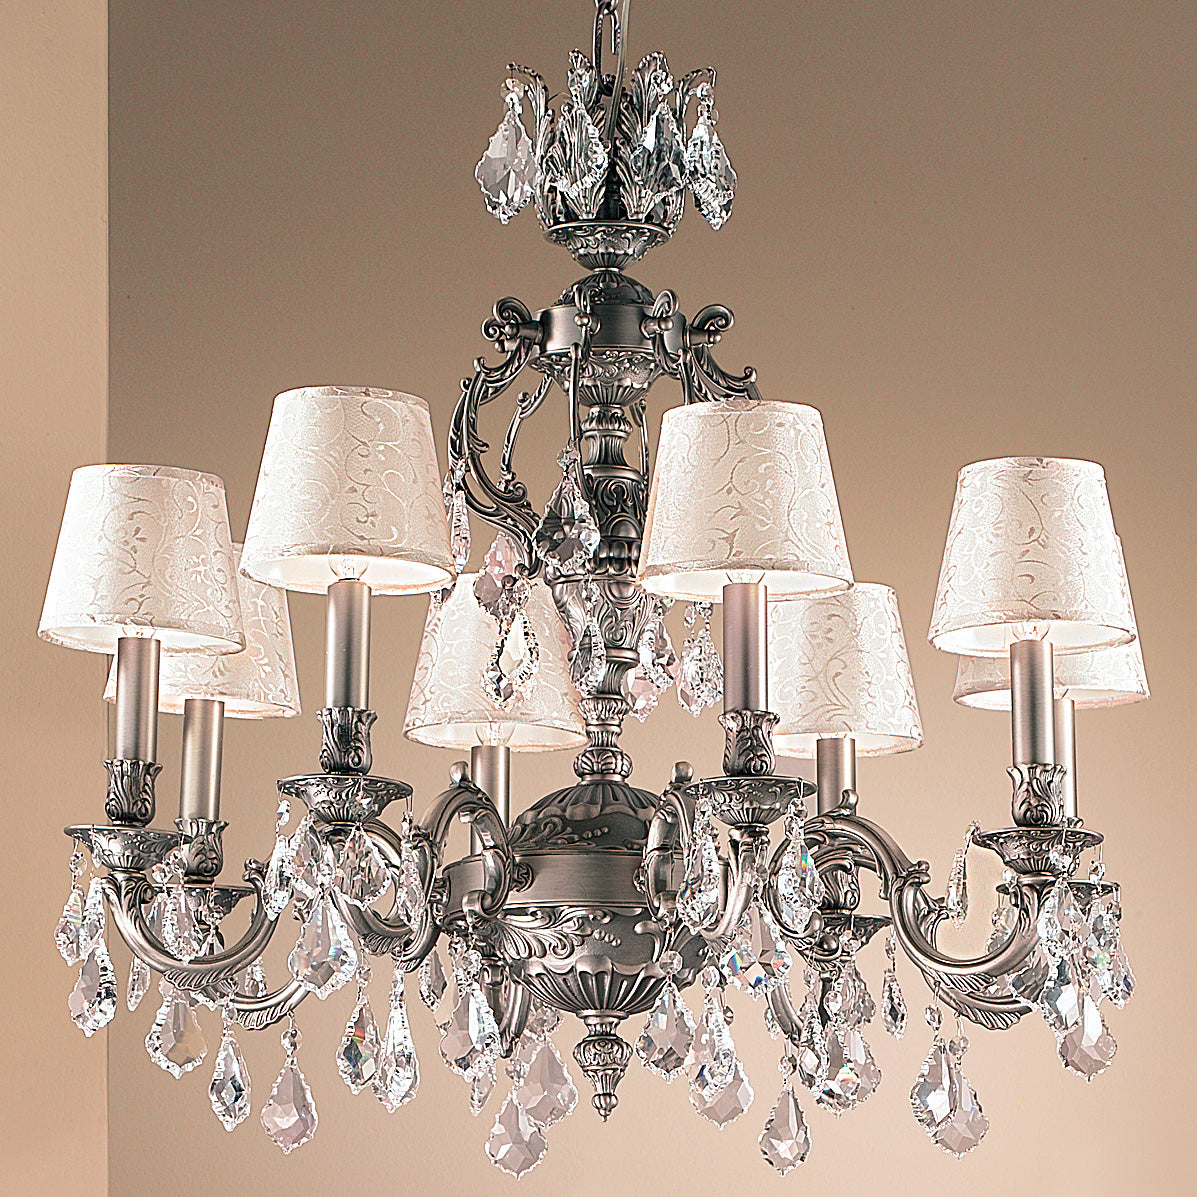 Classic Lighting 57378 FG CBK Chateau Crystal Chandelier in French Gold (Imported from Spain)